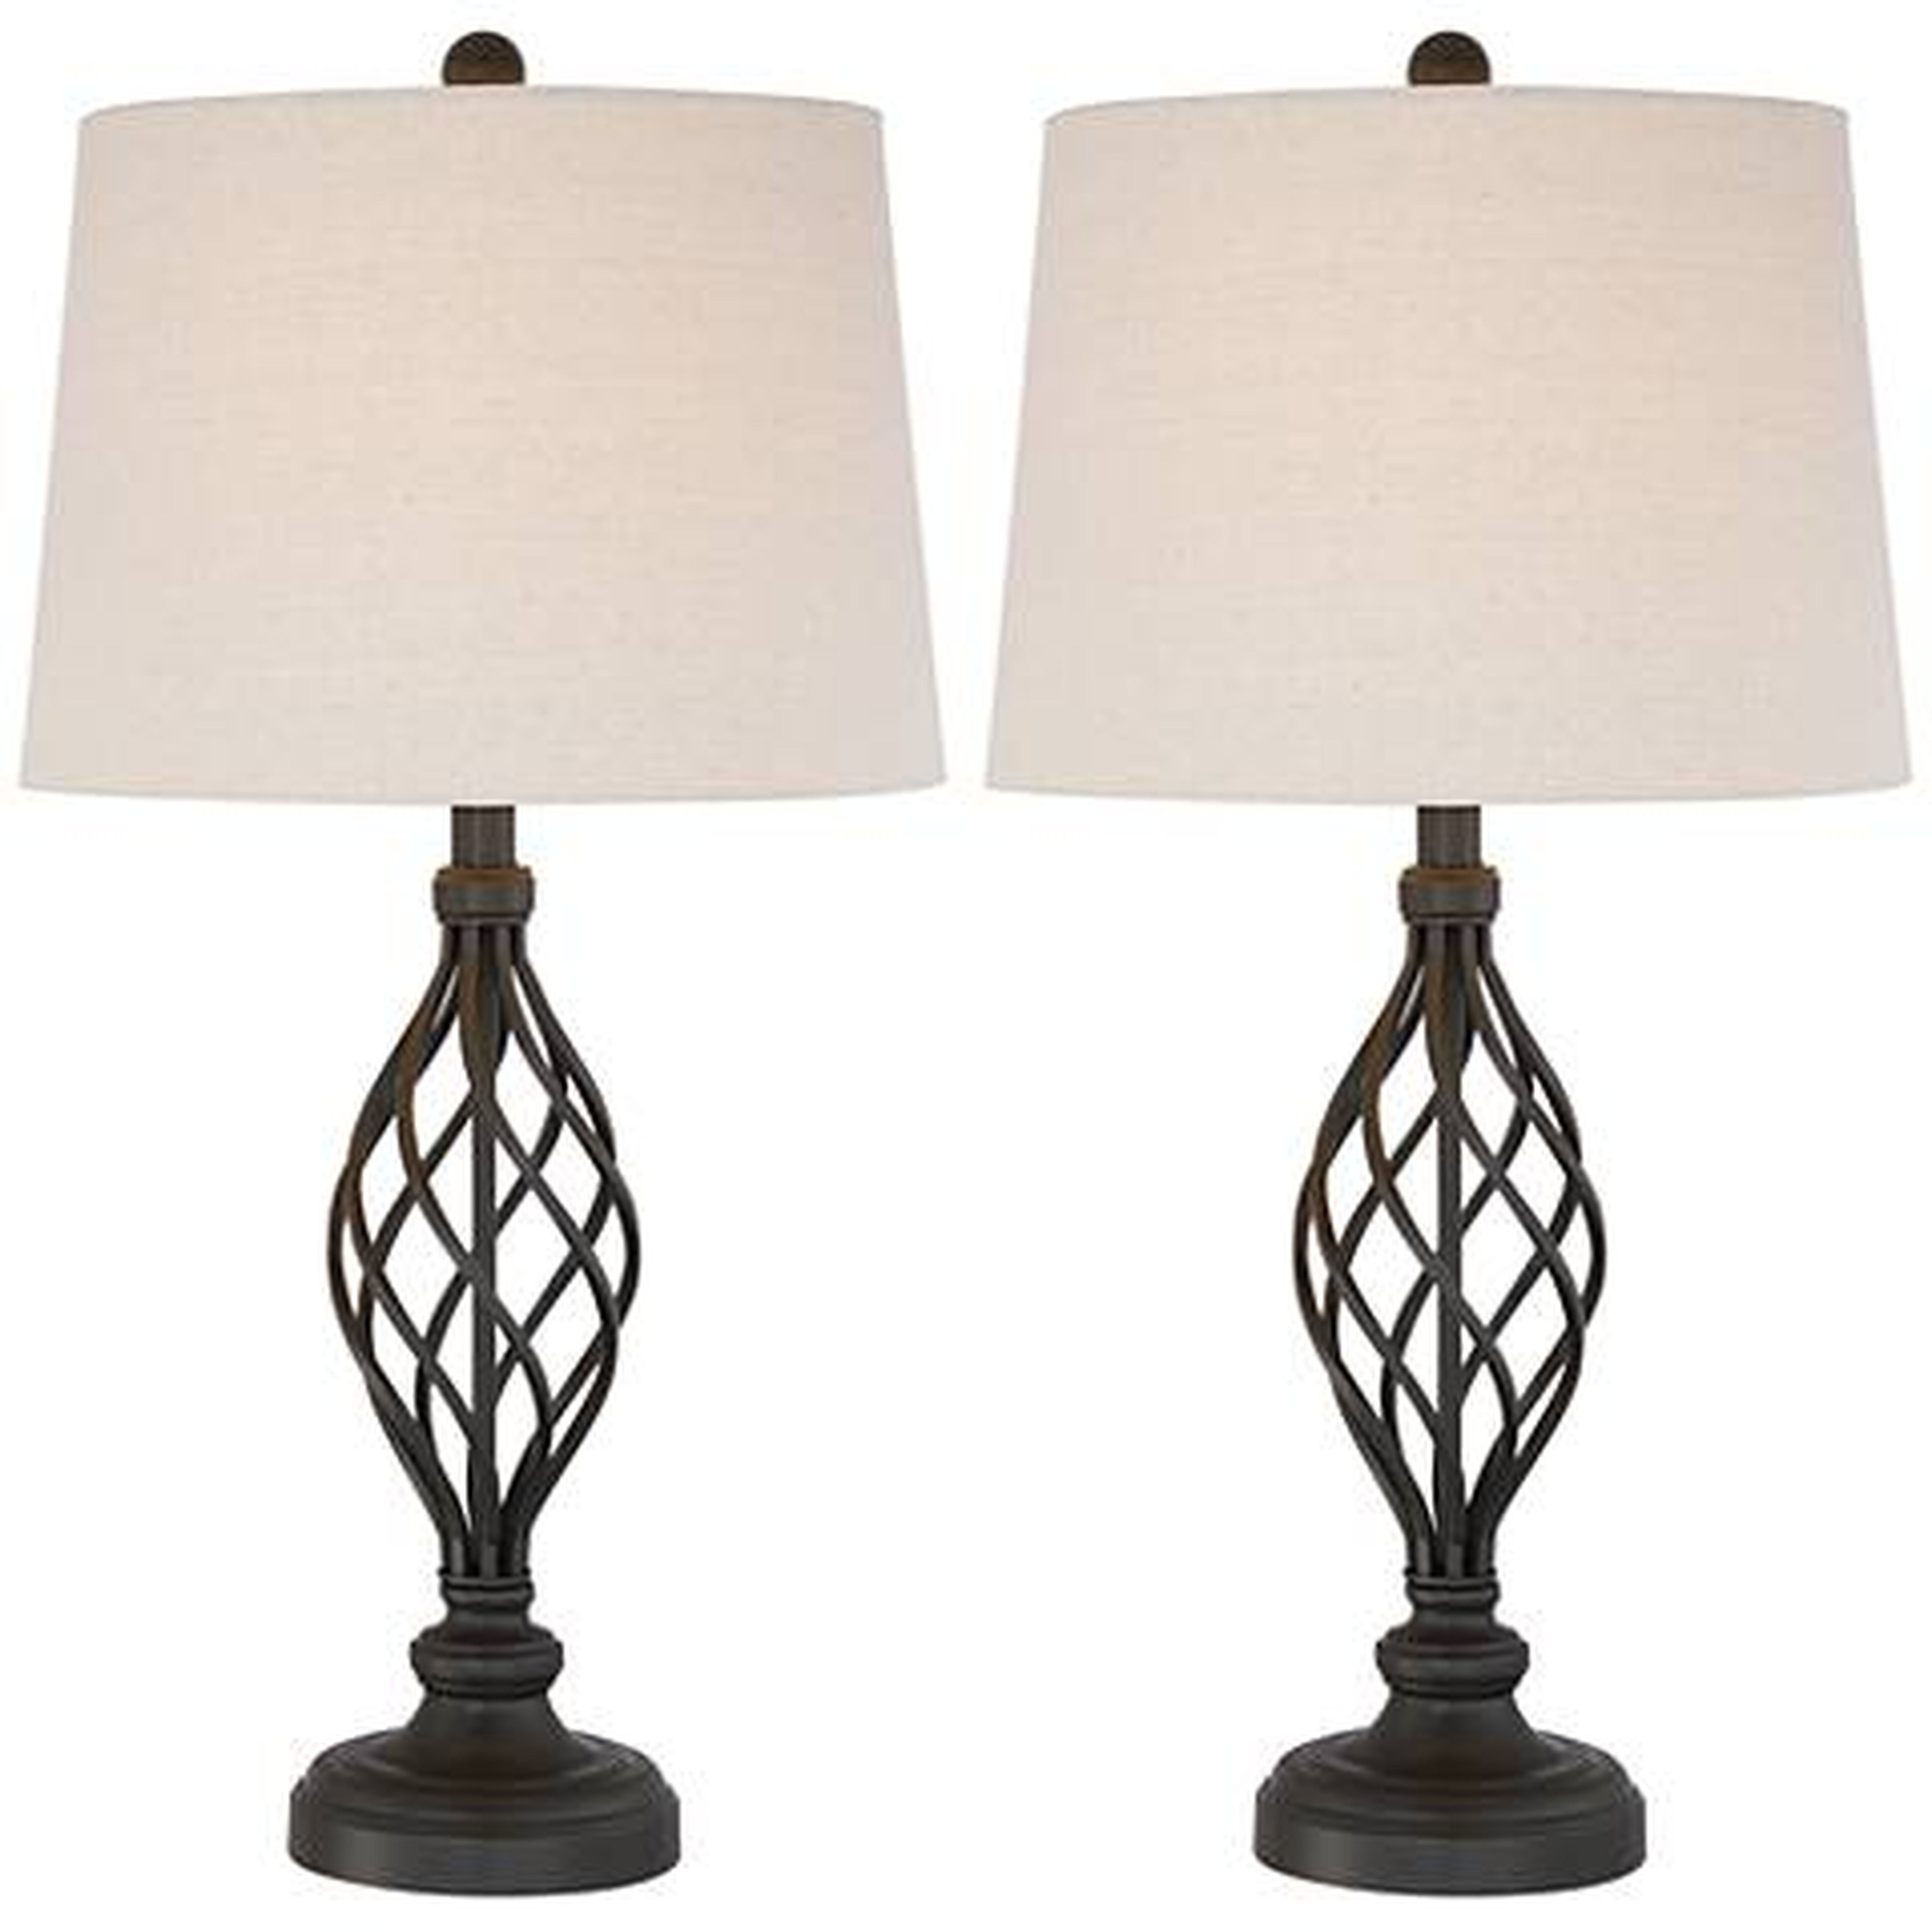 Annie Iron Scroll Table Lamps Set of 2 - Lamps Plus